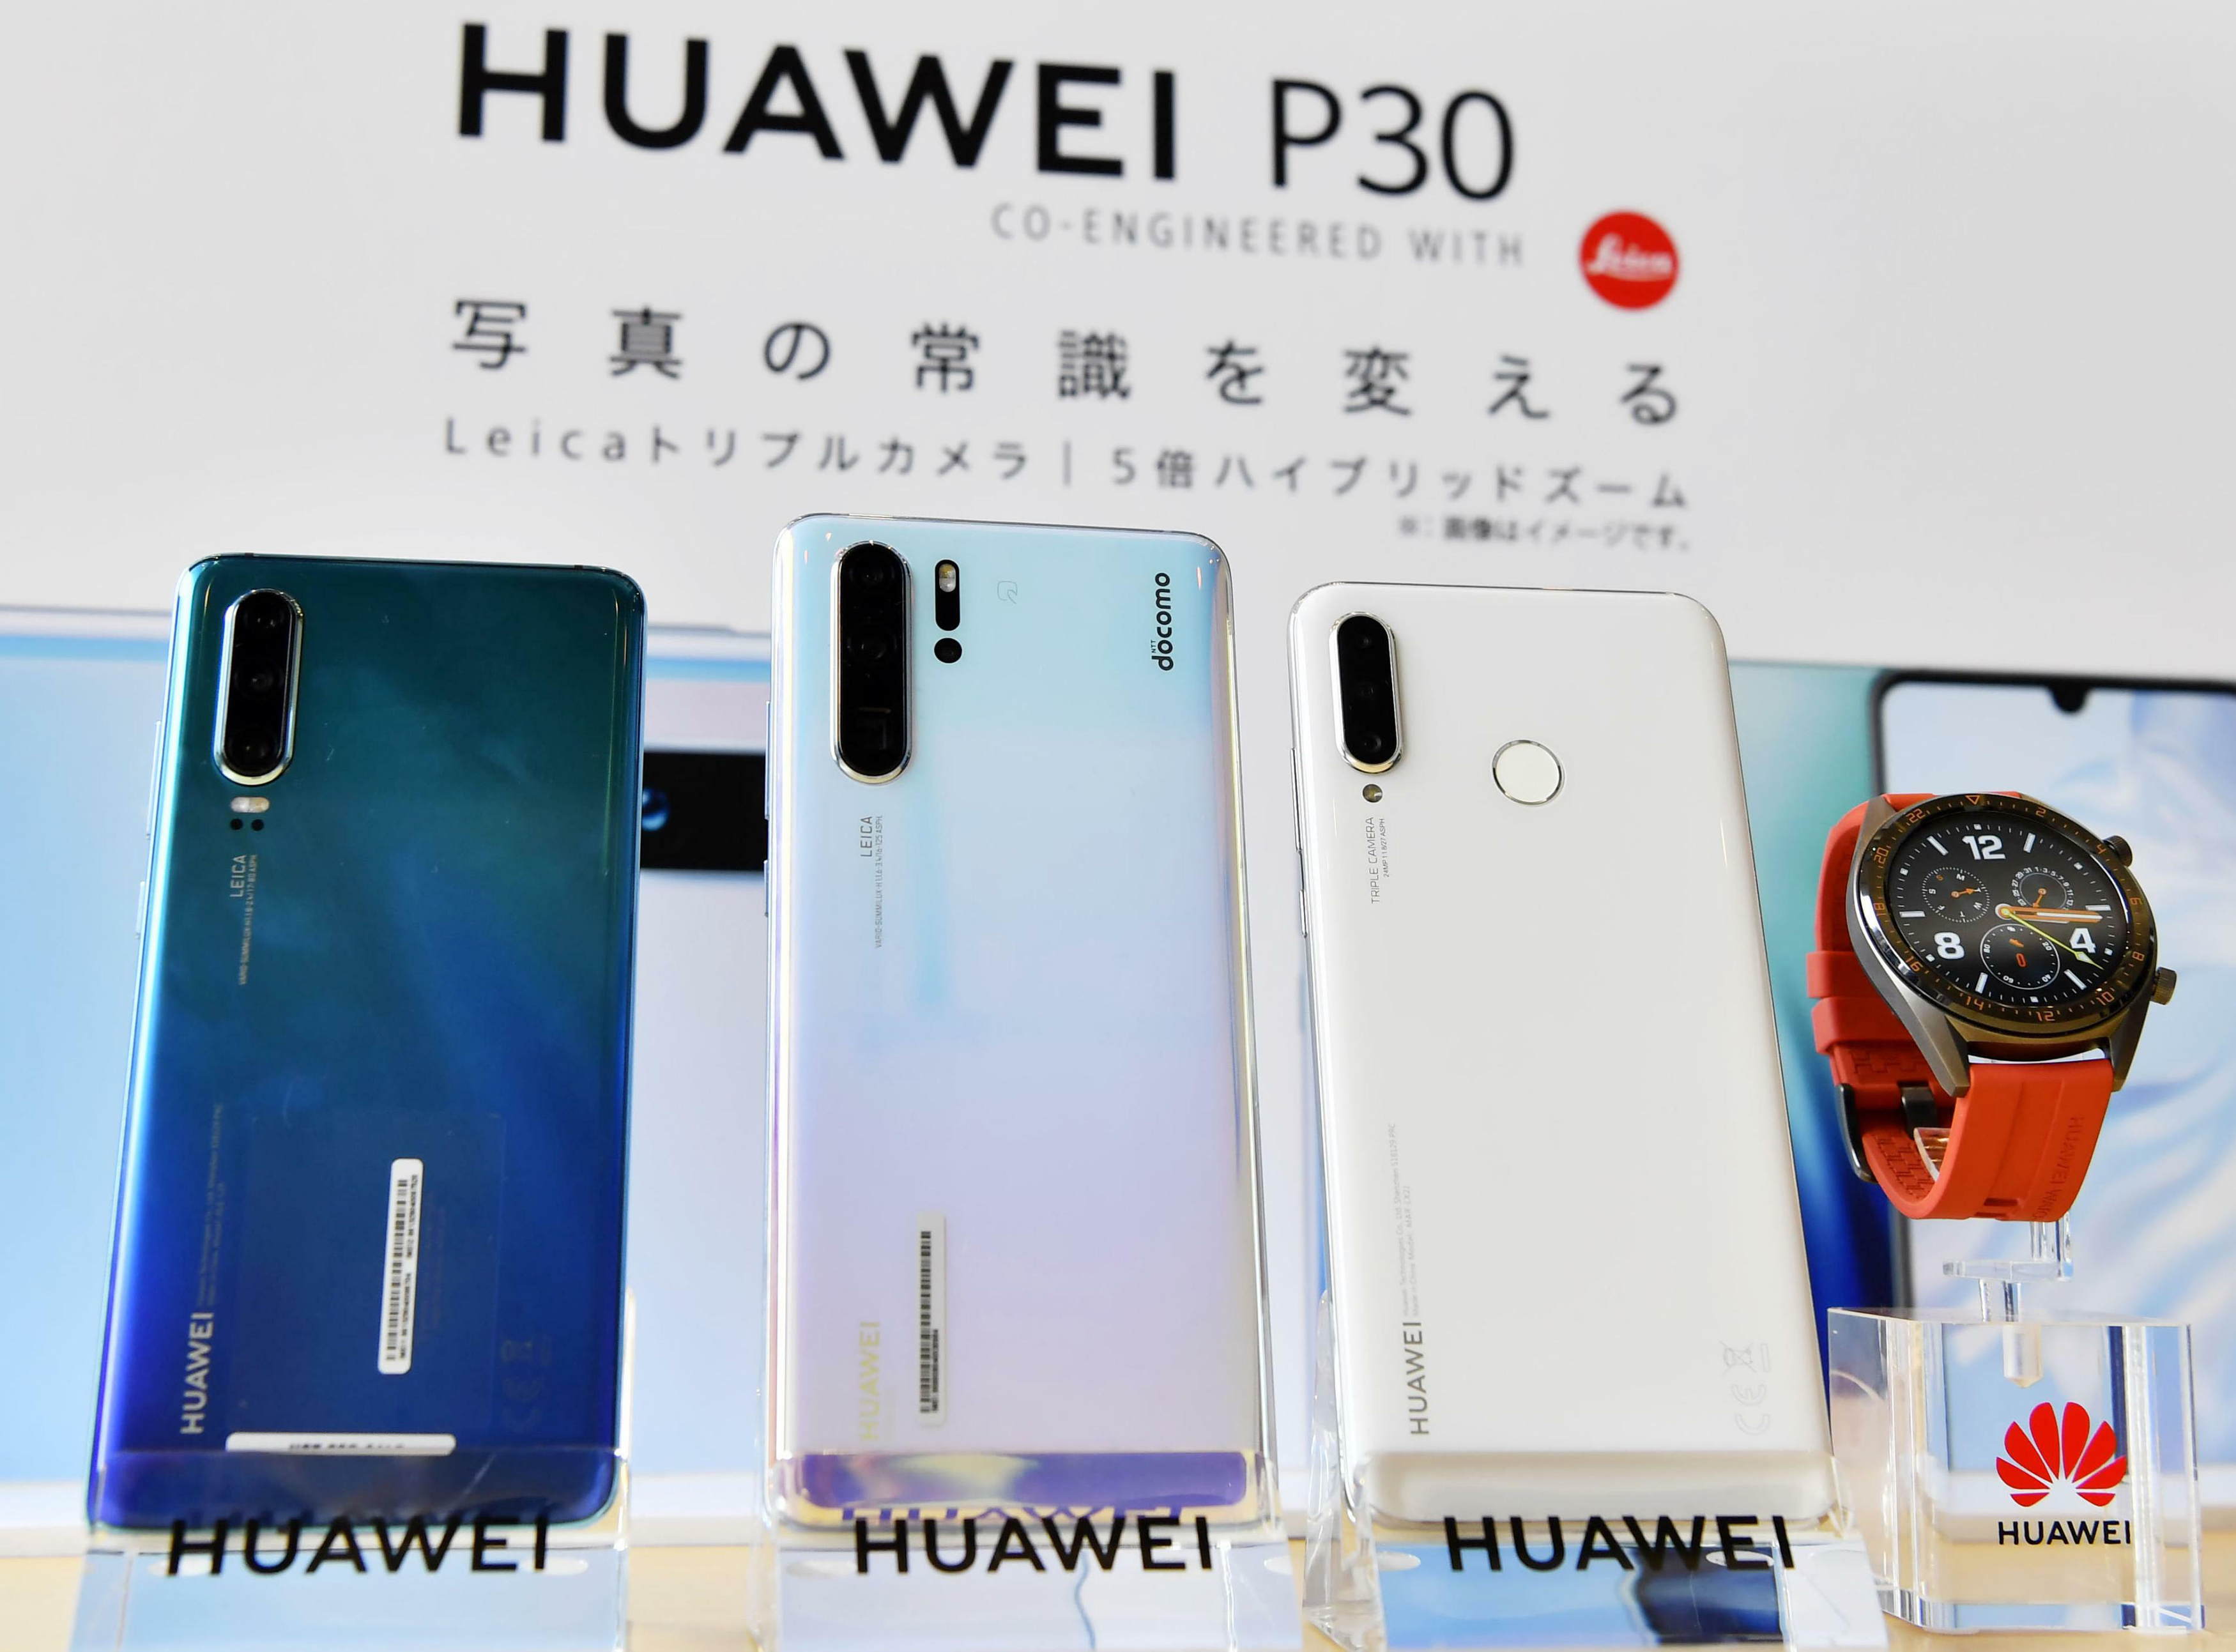 jammer network connections bellevue | UK, Japan Mobile Operators Suspend Huawei 5G Phone Launches